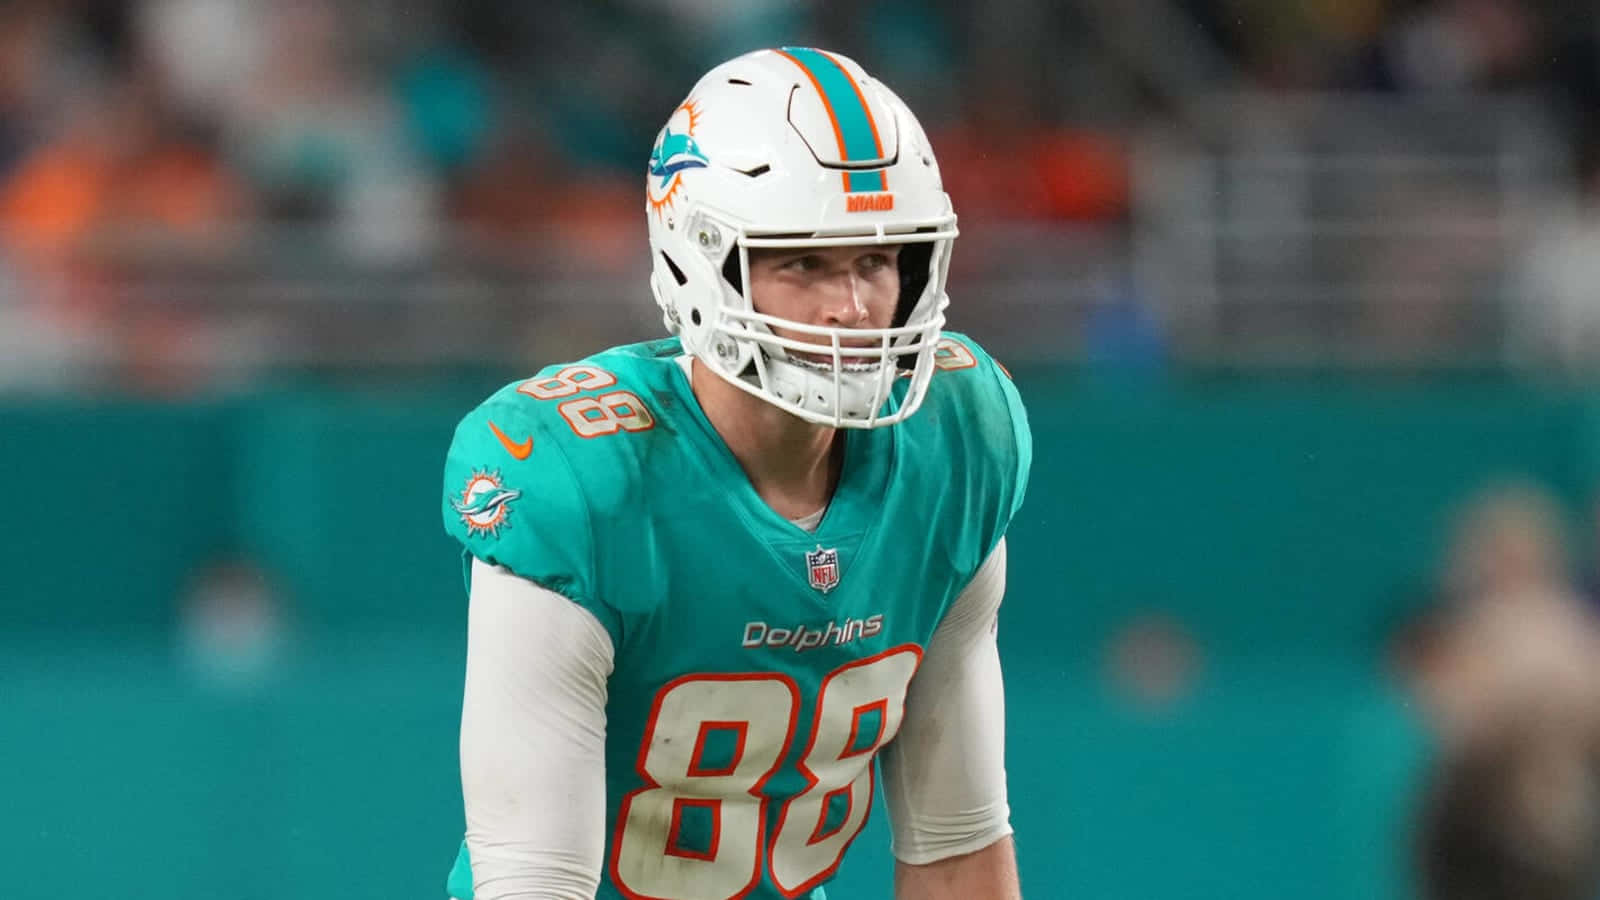 Miami Dolphins Player88 Readyfor Action Wallpaper